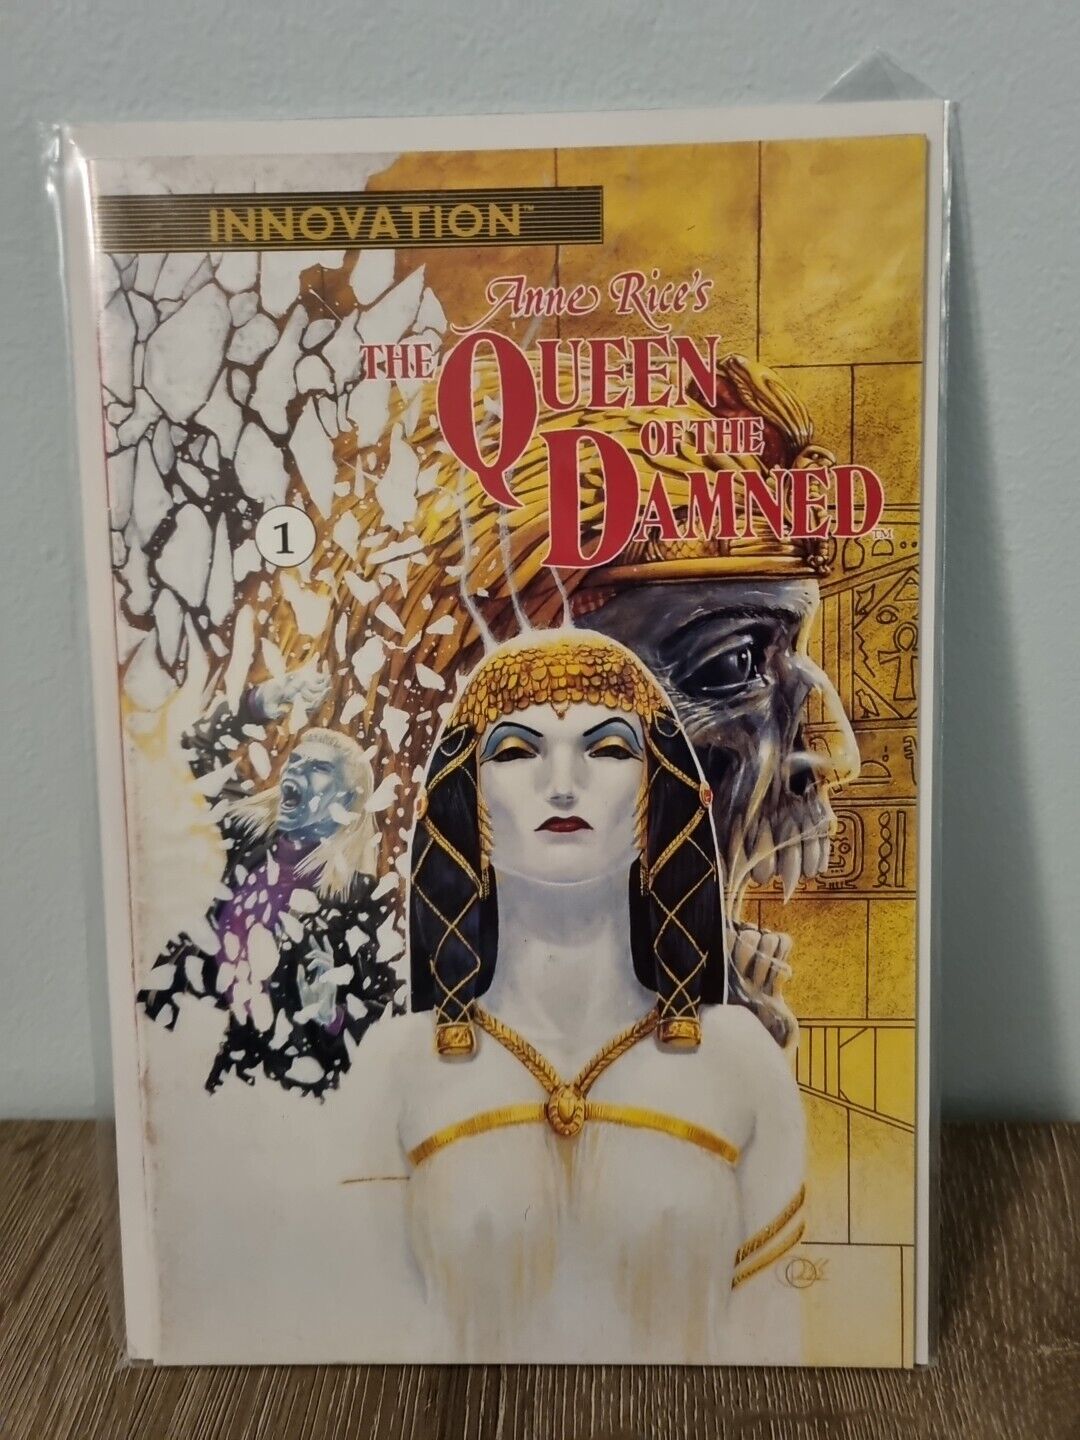 Anne Rice's Queen of the Damned #1 - 1991 - Innovation Comics 